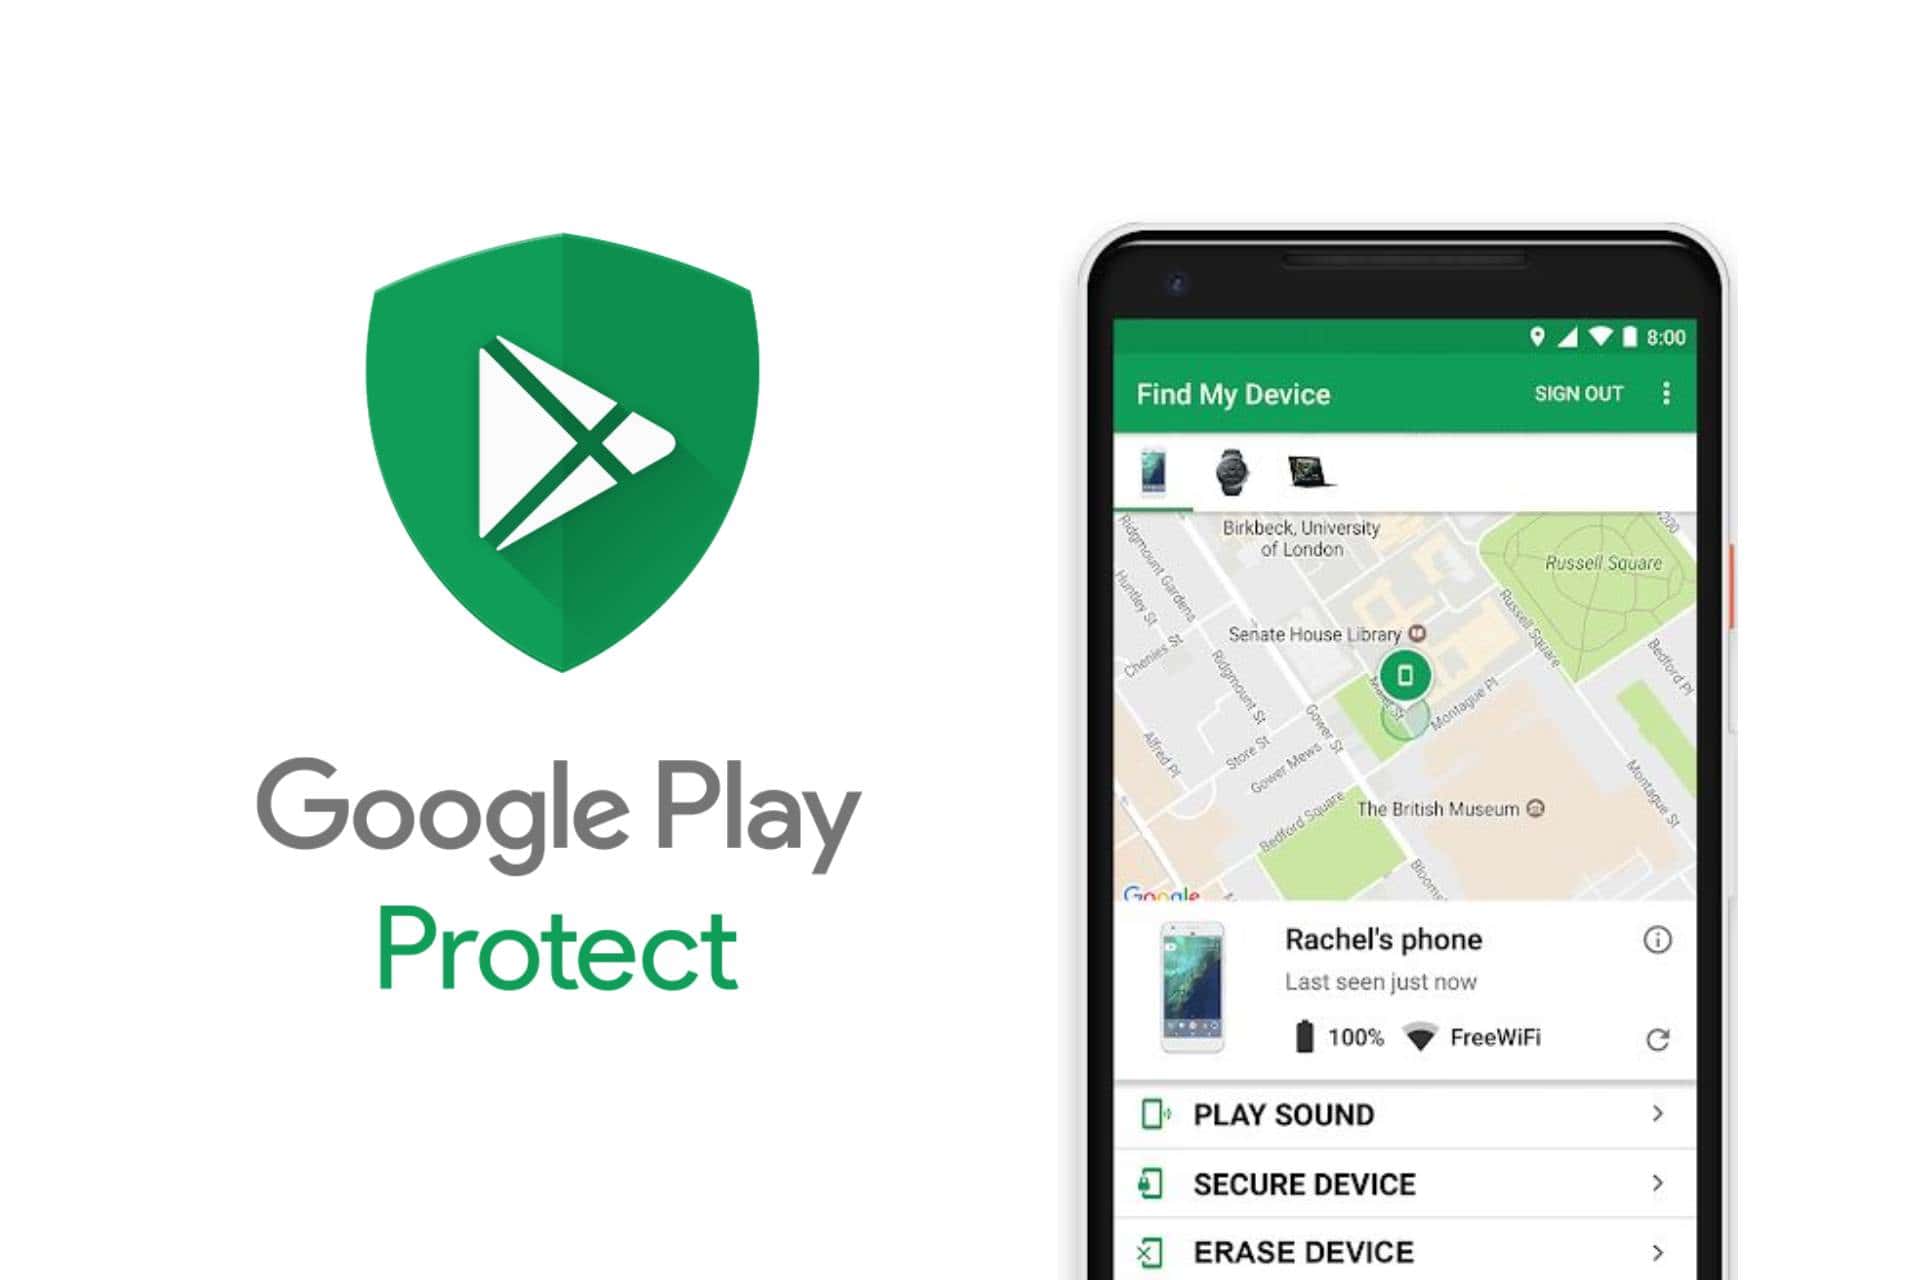 Google appears to be working on their own Find My mesh network for Android